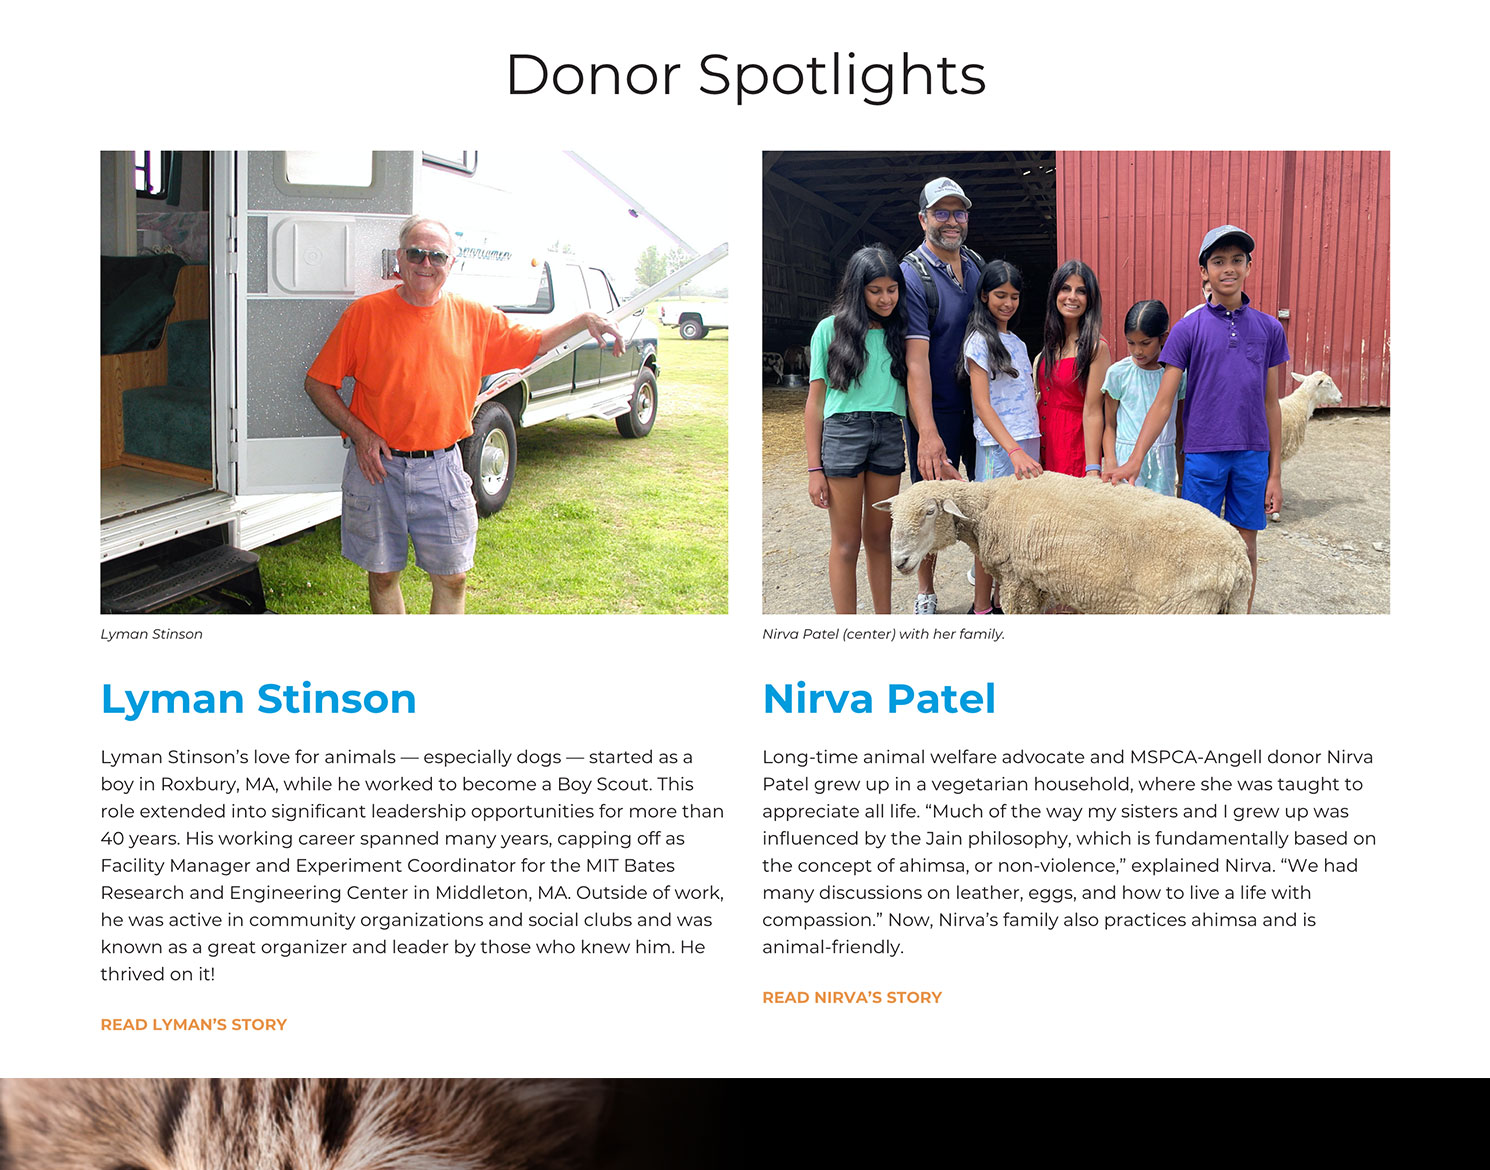 MSPCA-Angell newsletter website showing donor names and information about their involvement